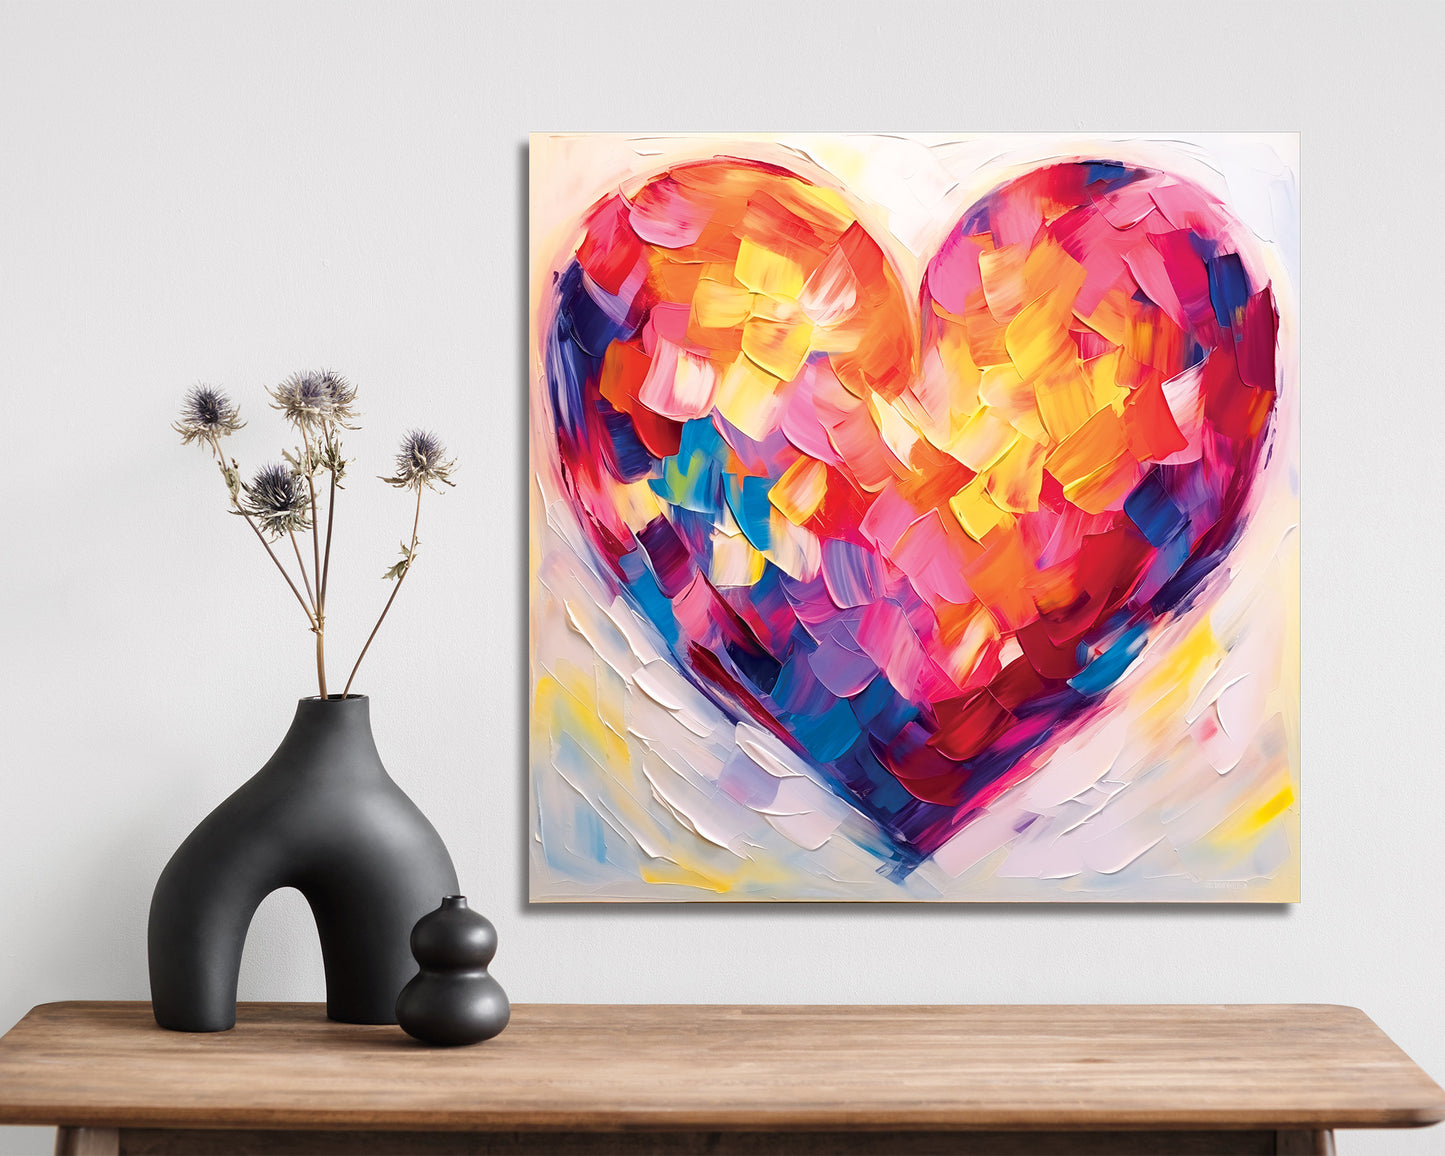 12in Oil Painting Style of a Colorful Heart Valentine__ Day Canvas Print Wall Art, Wall Canvas Printing, Living Room Decor